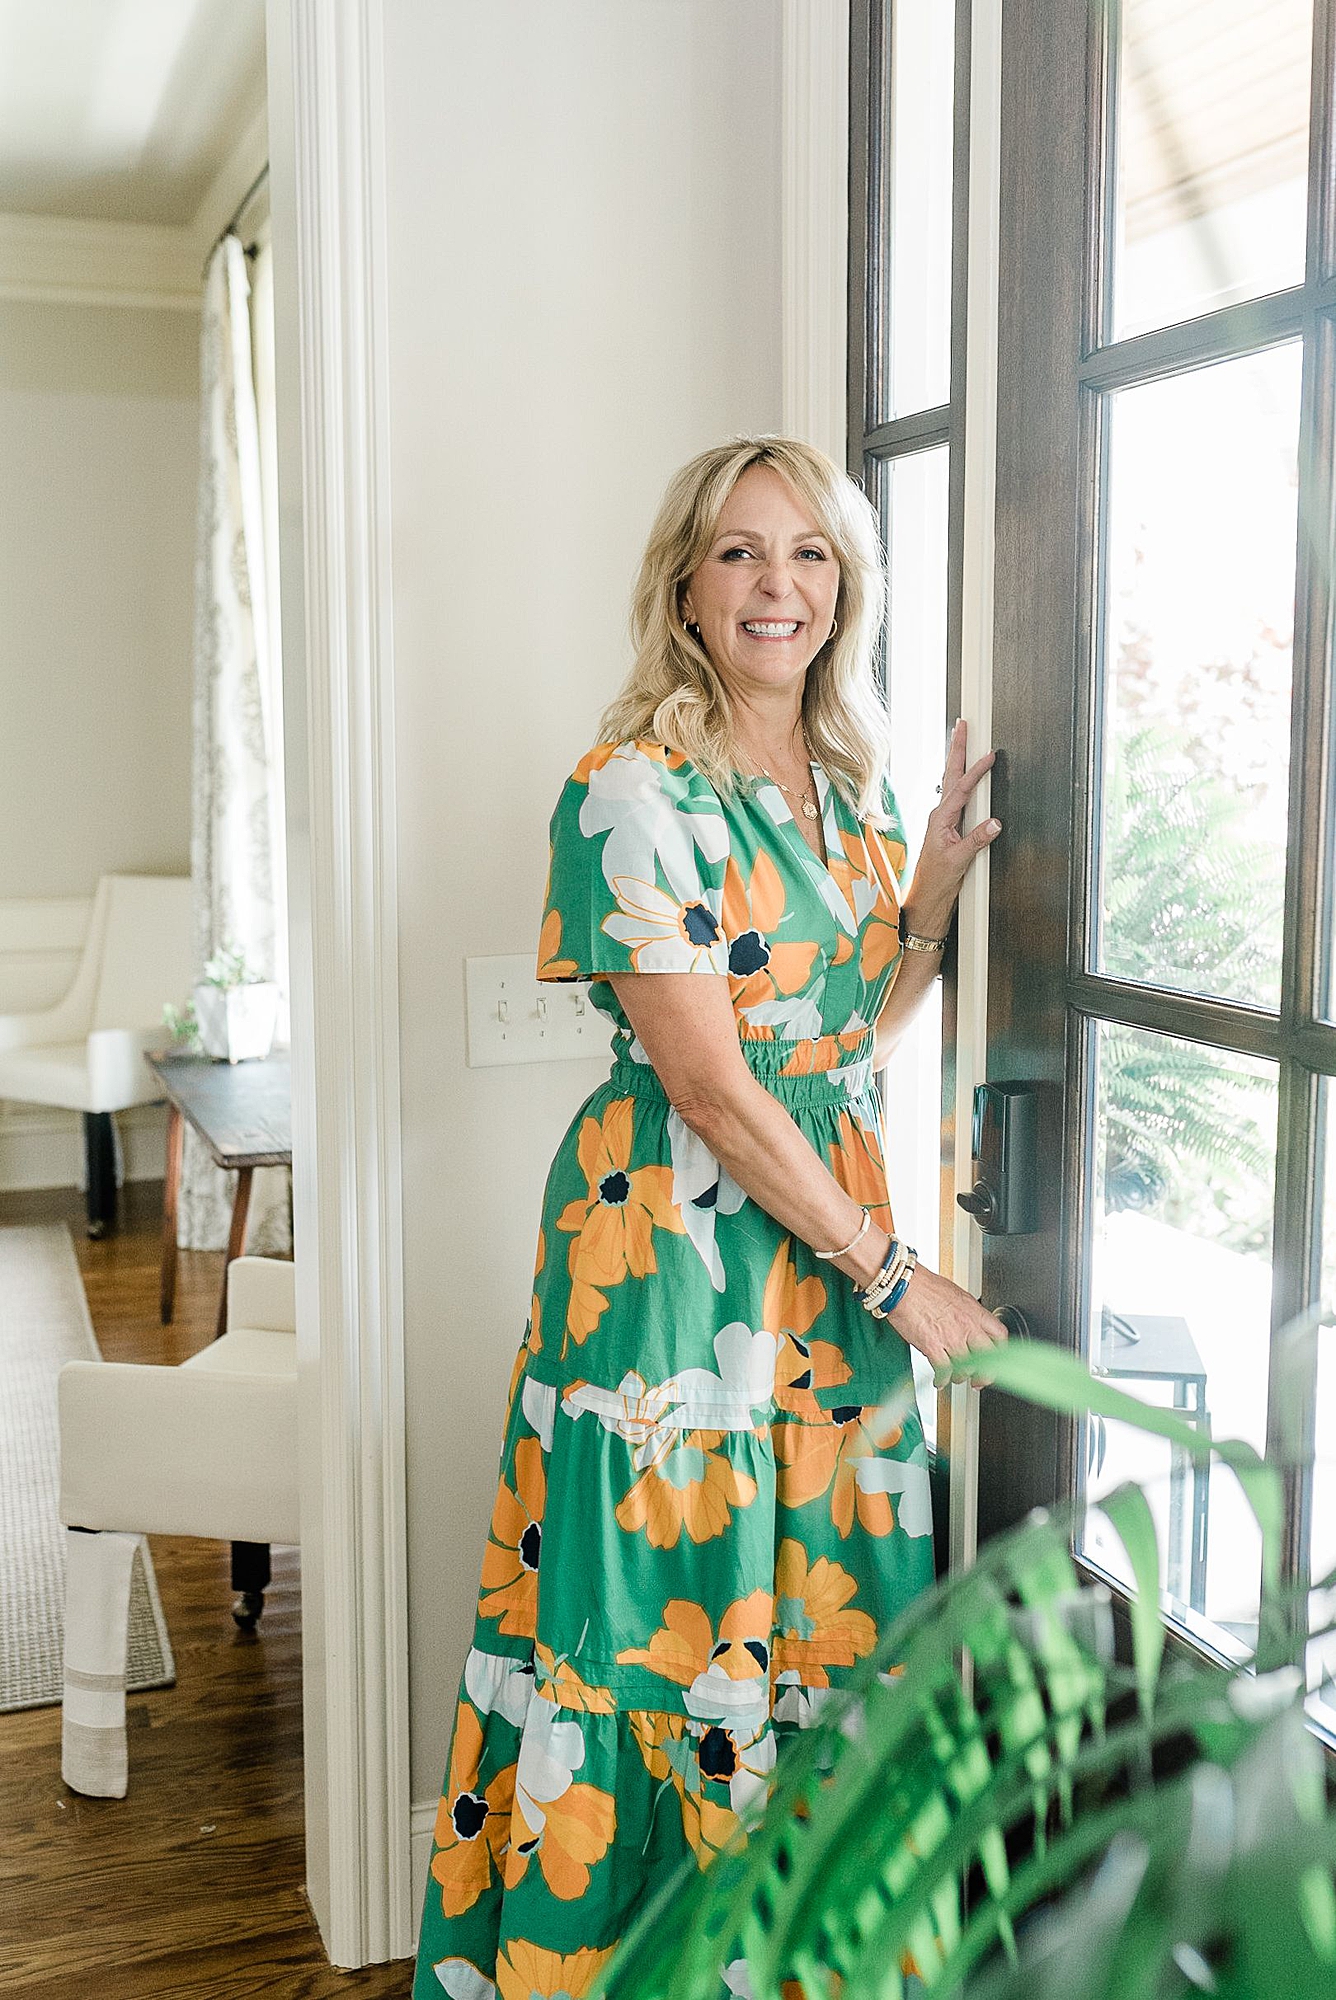 a_nashville_realtor_ashley_hicks_is_wearing_a_green_dress_and_opening_a_door_and_smiling_at_the_camera